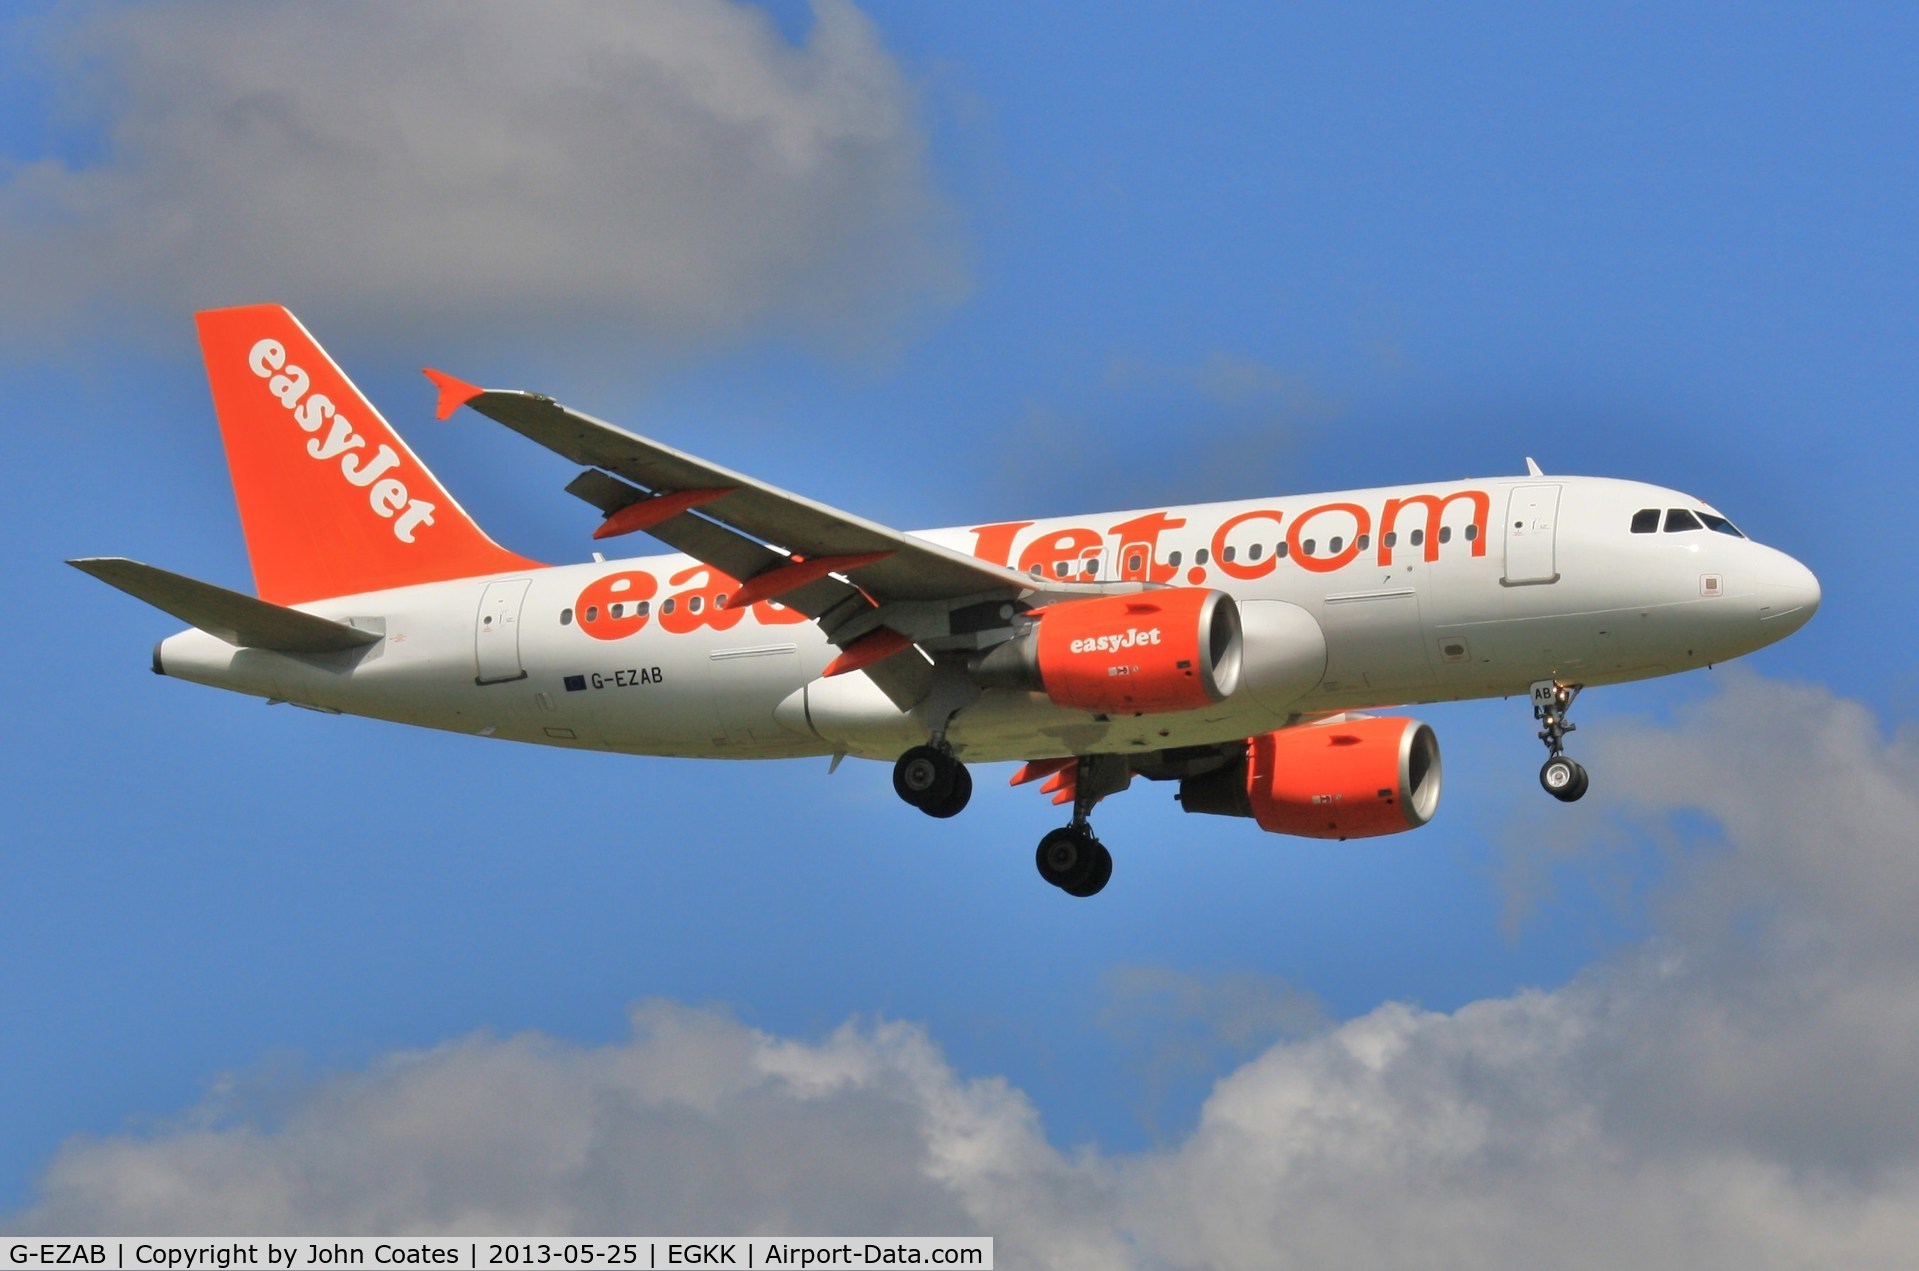 G-EZAB, 2006 Airbus A319-111 C/N 2681, Finals to 08R